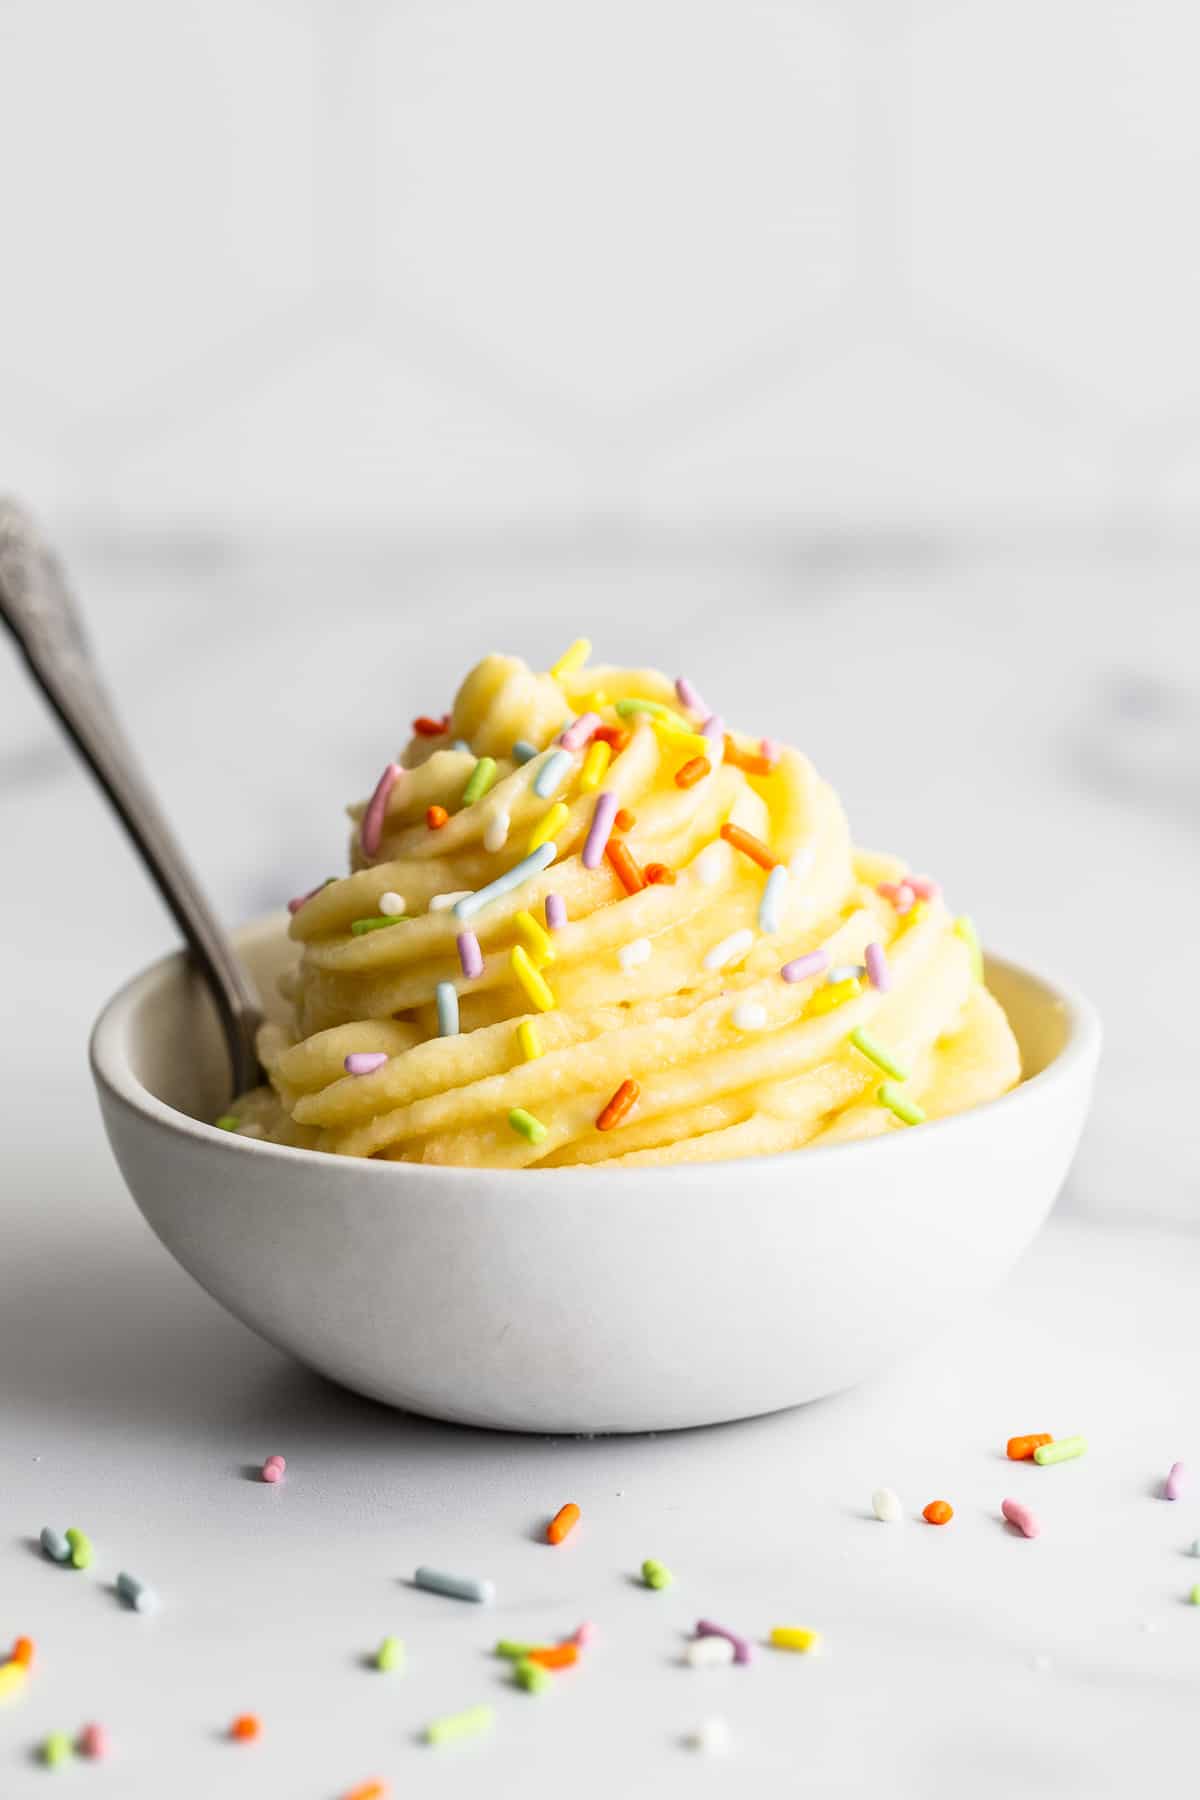 Dole Whip in a bowl topped with sprinkles.